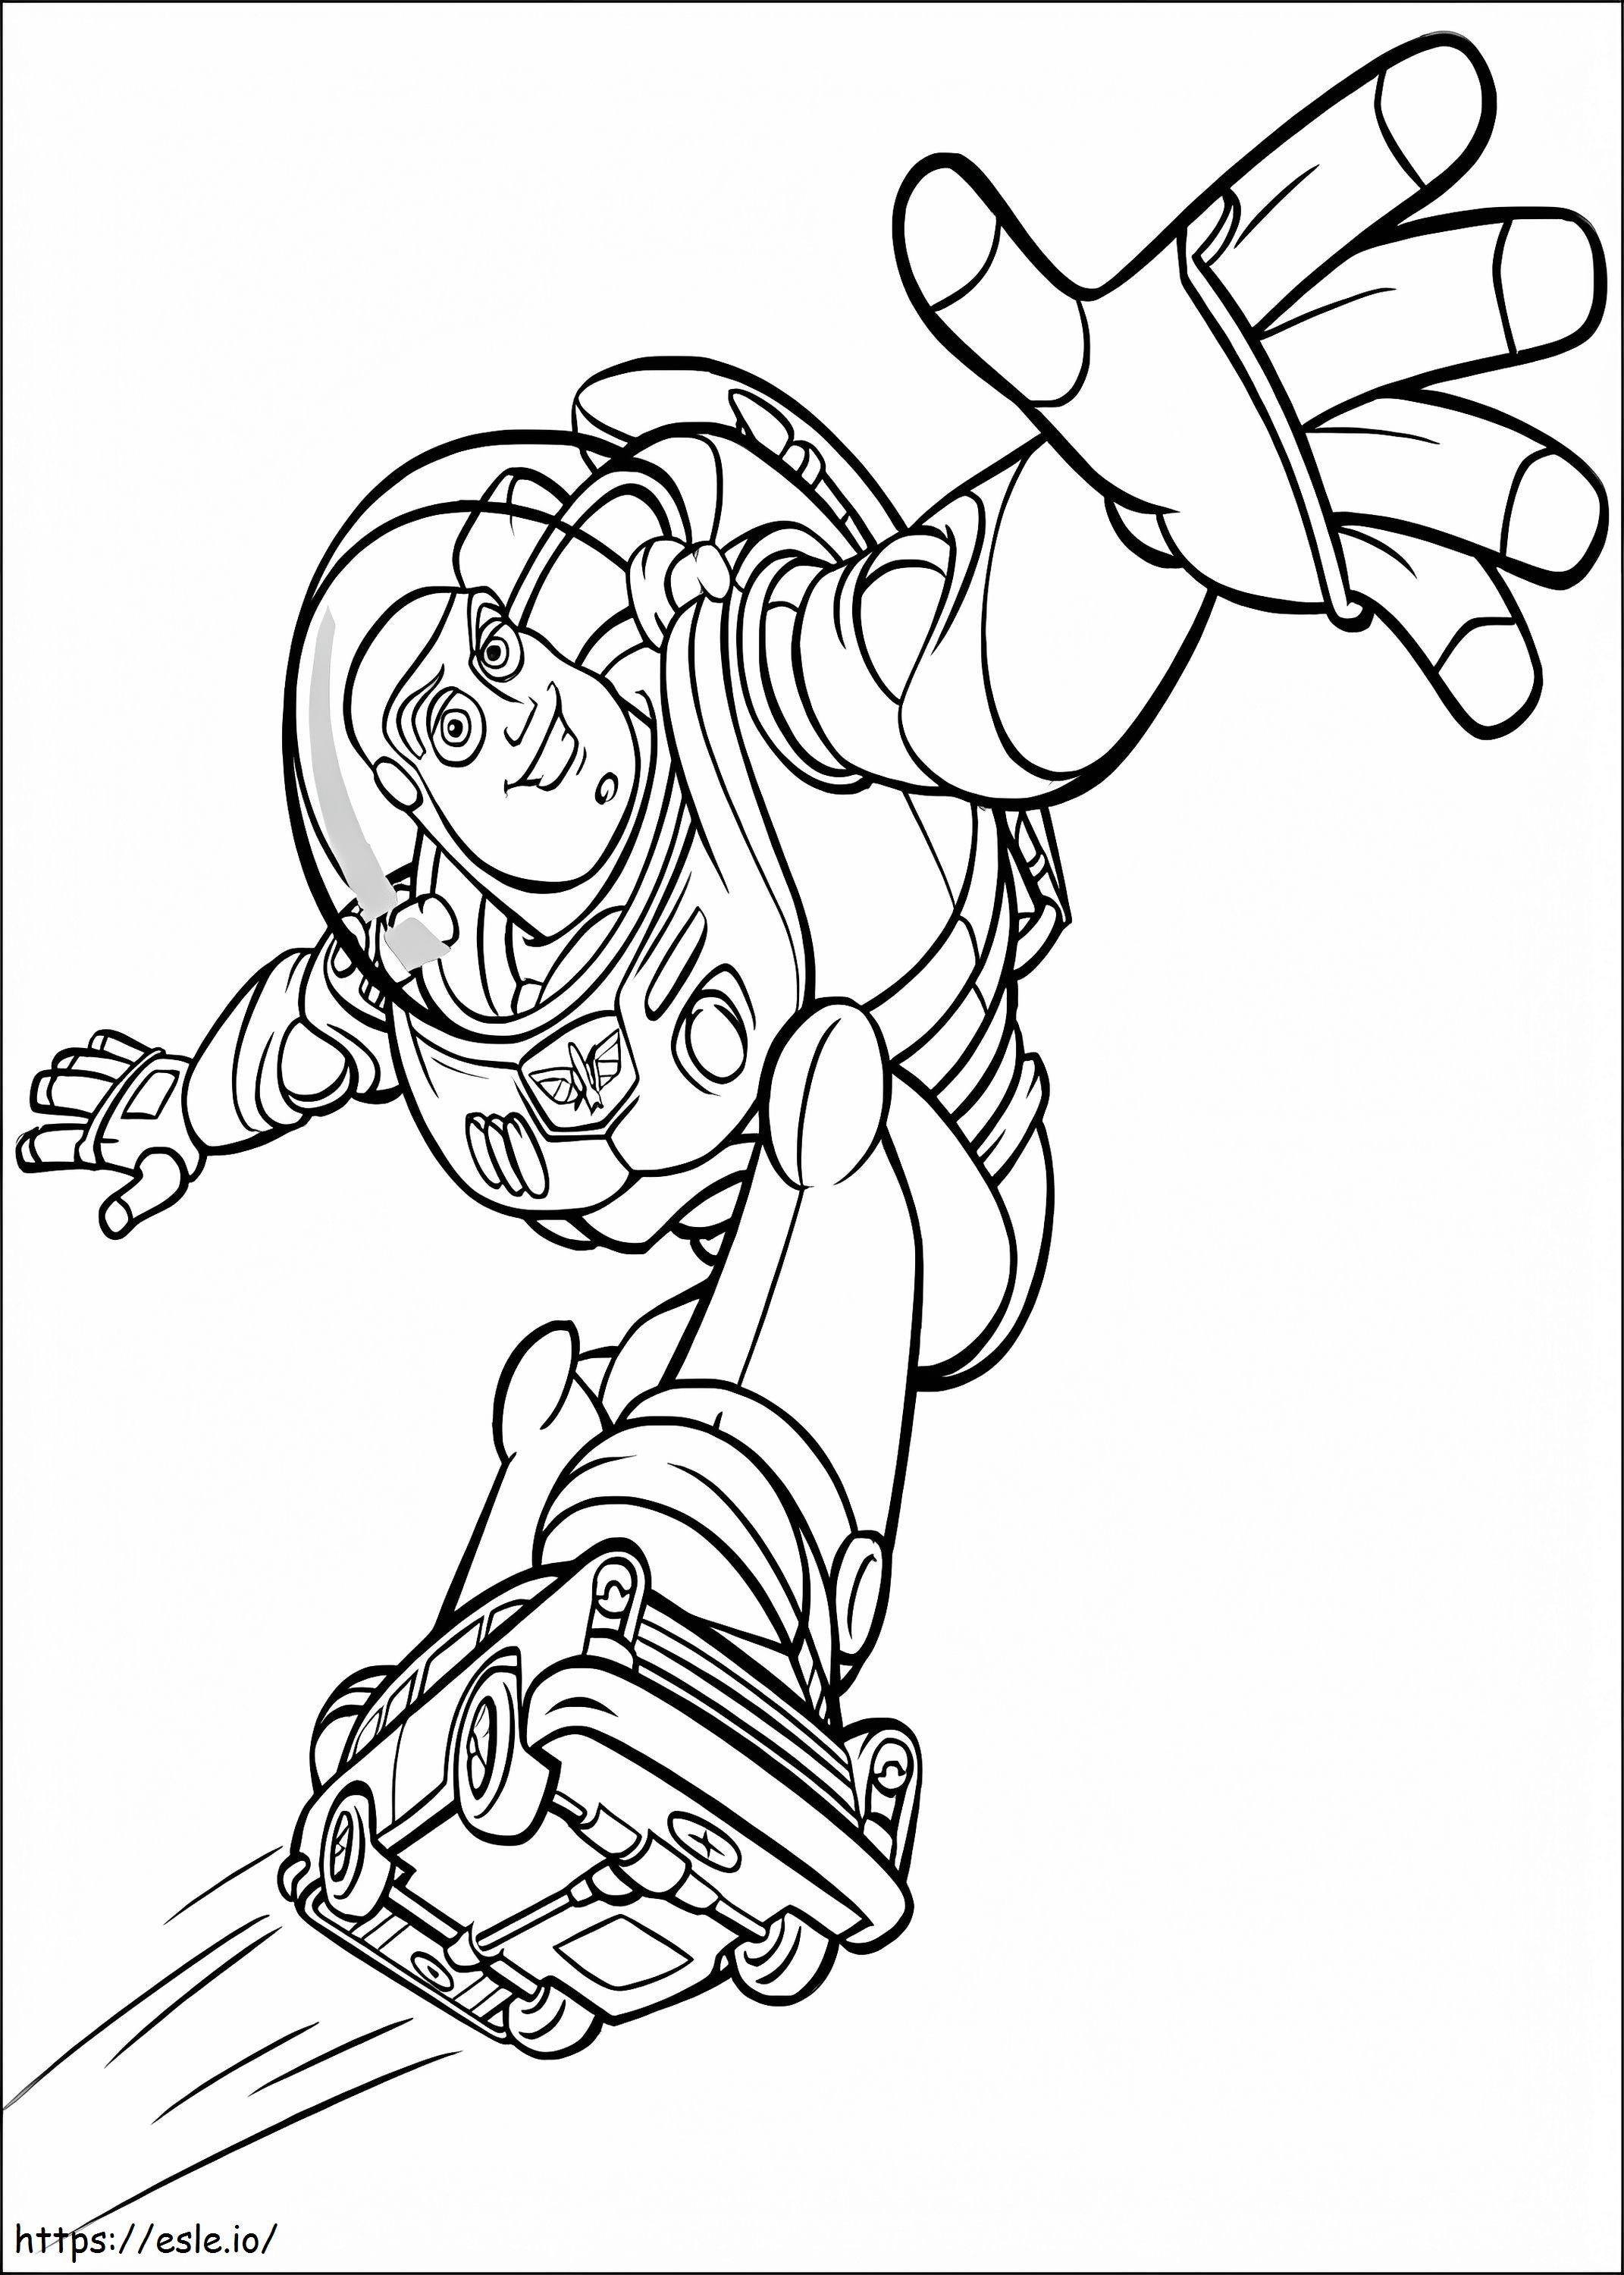 Cool Buzz Lightyear coloring page